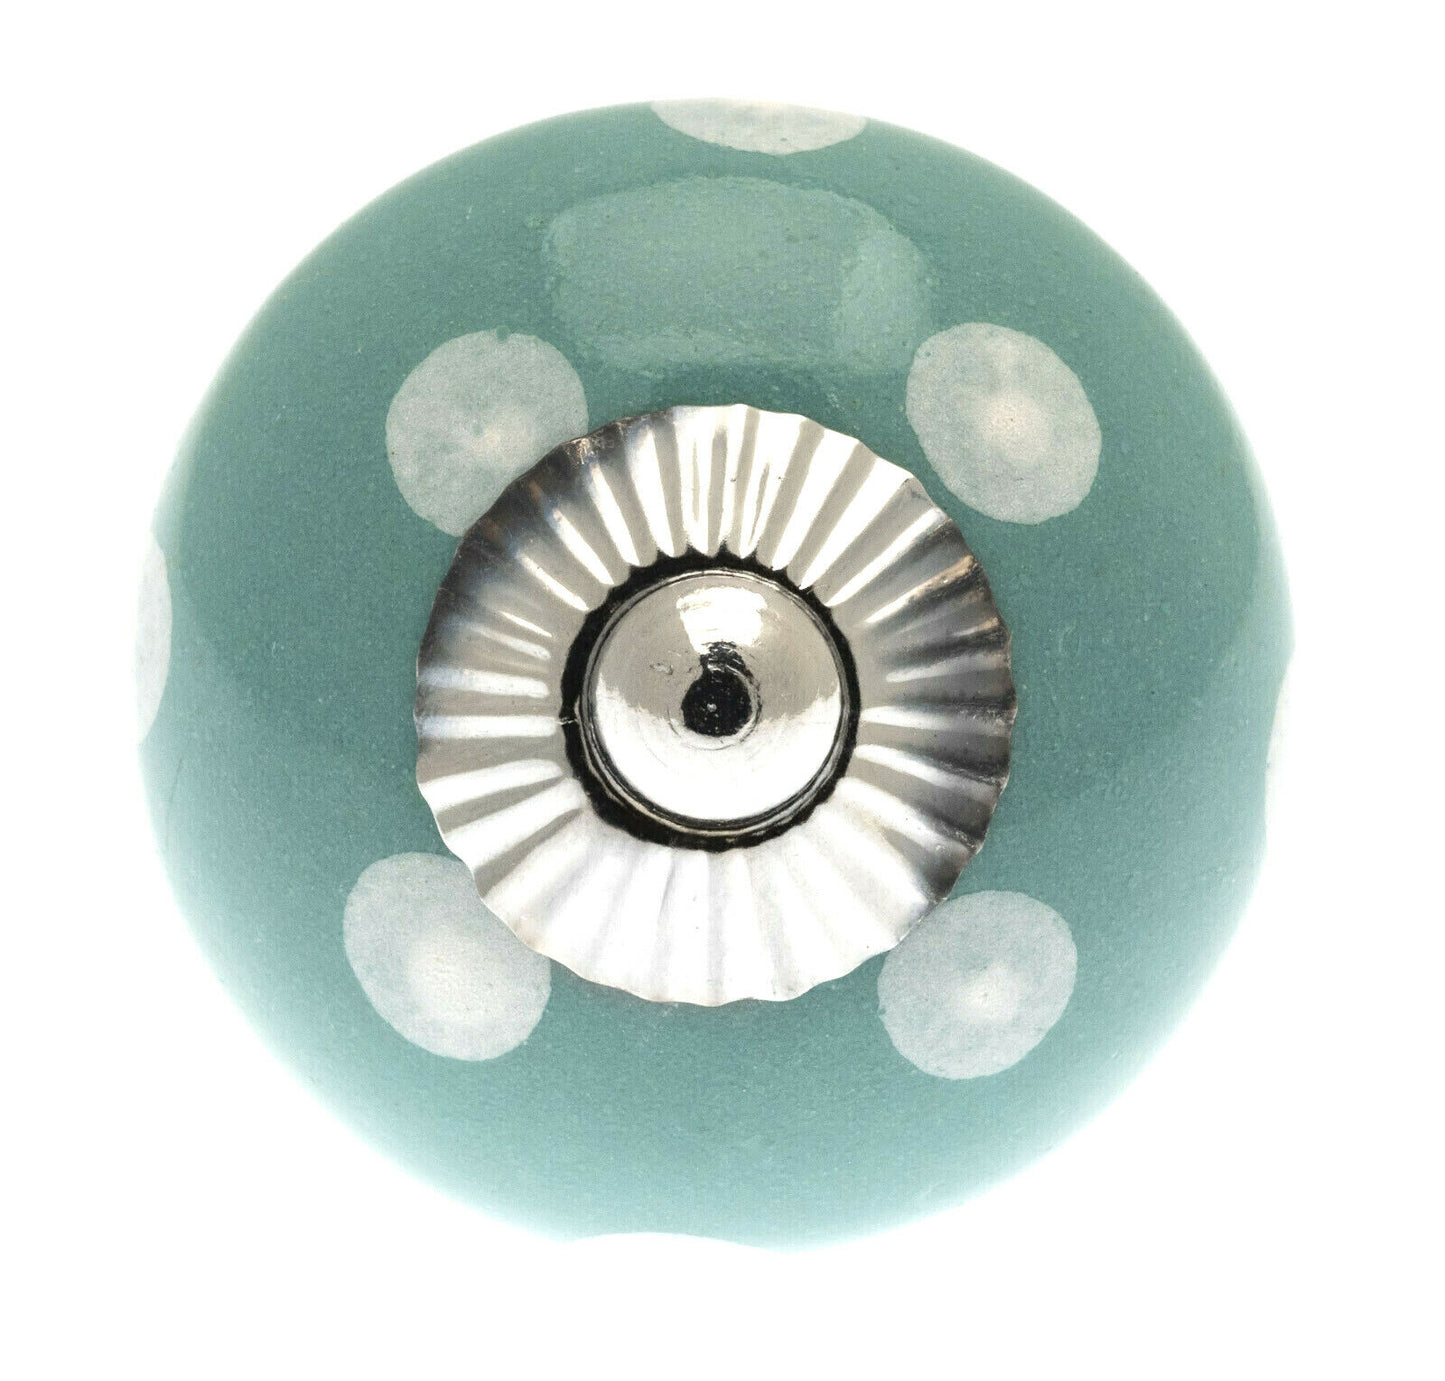 Ceramic Cupboard Door Knobs Turquoise with White Spots